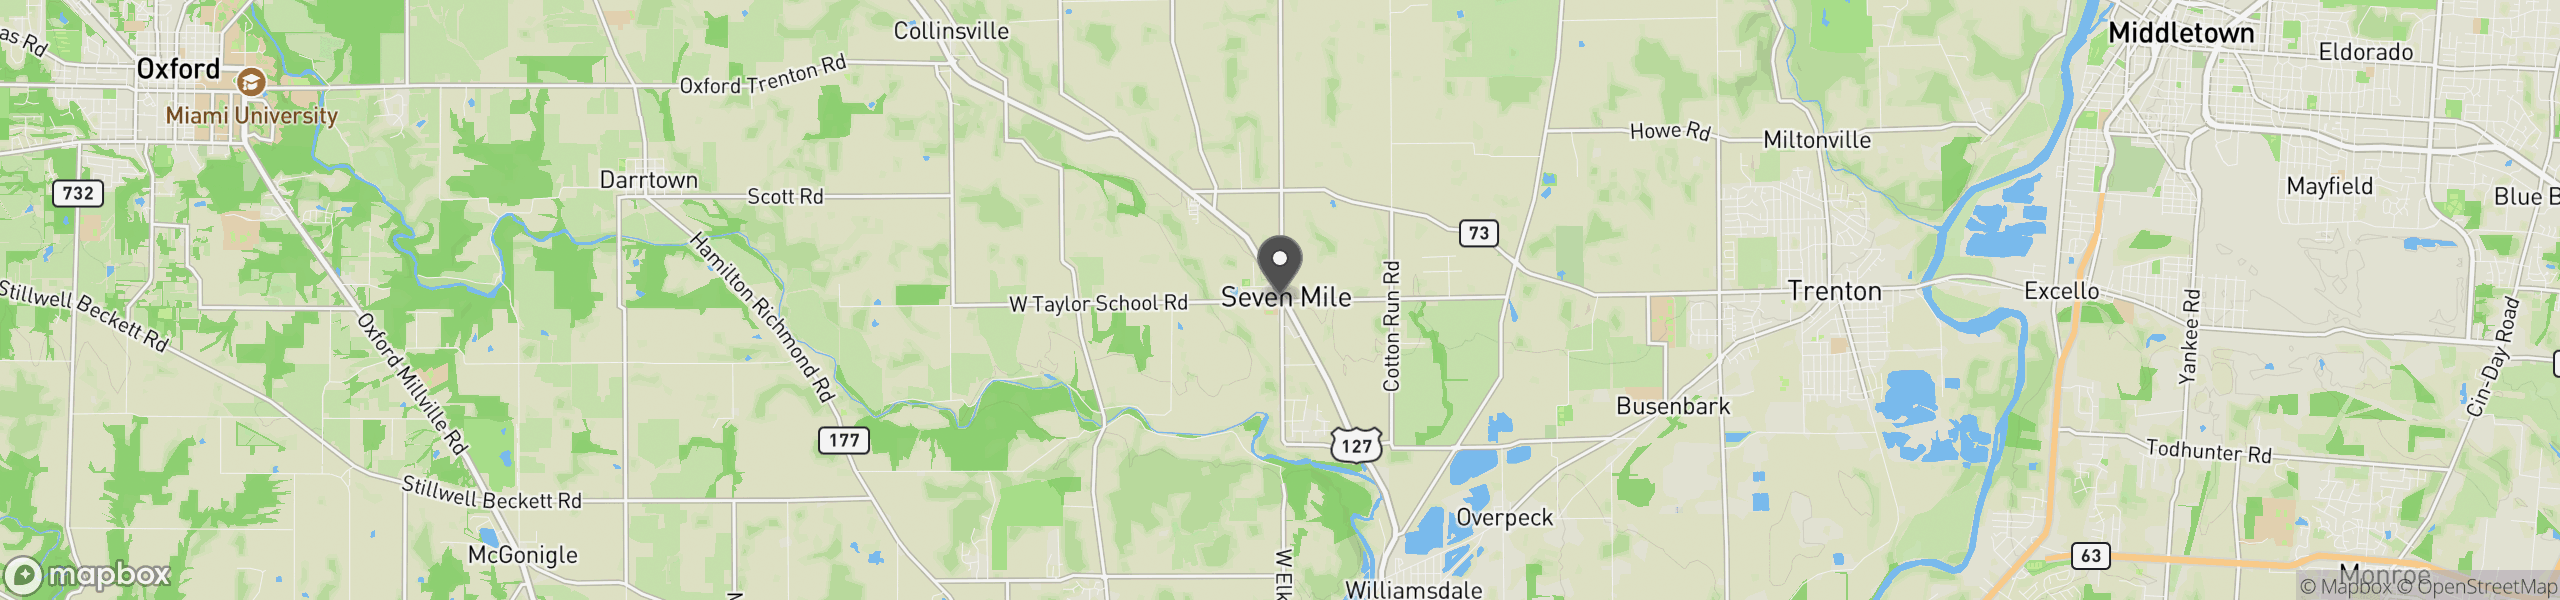 Seven Mile, OH 45062